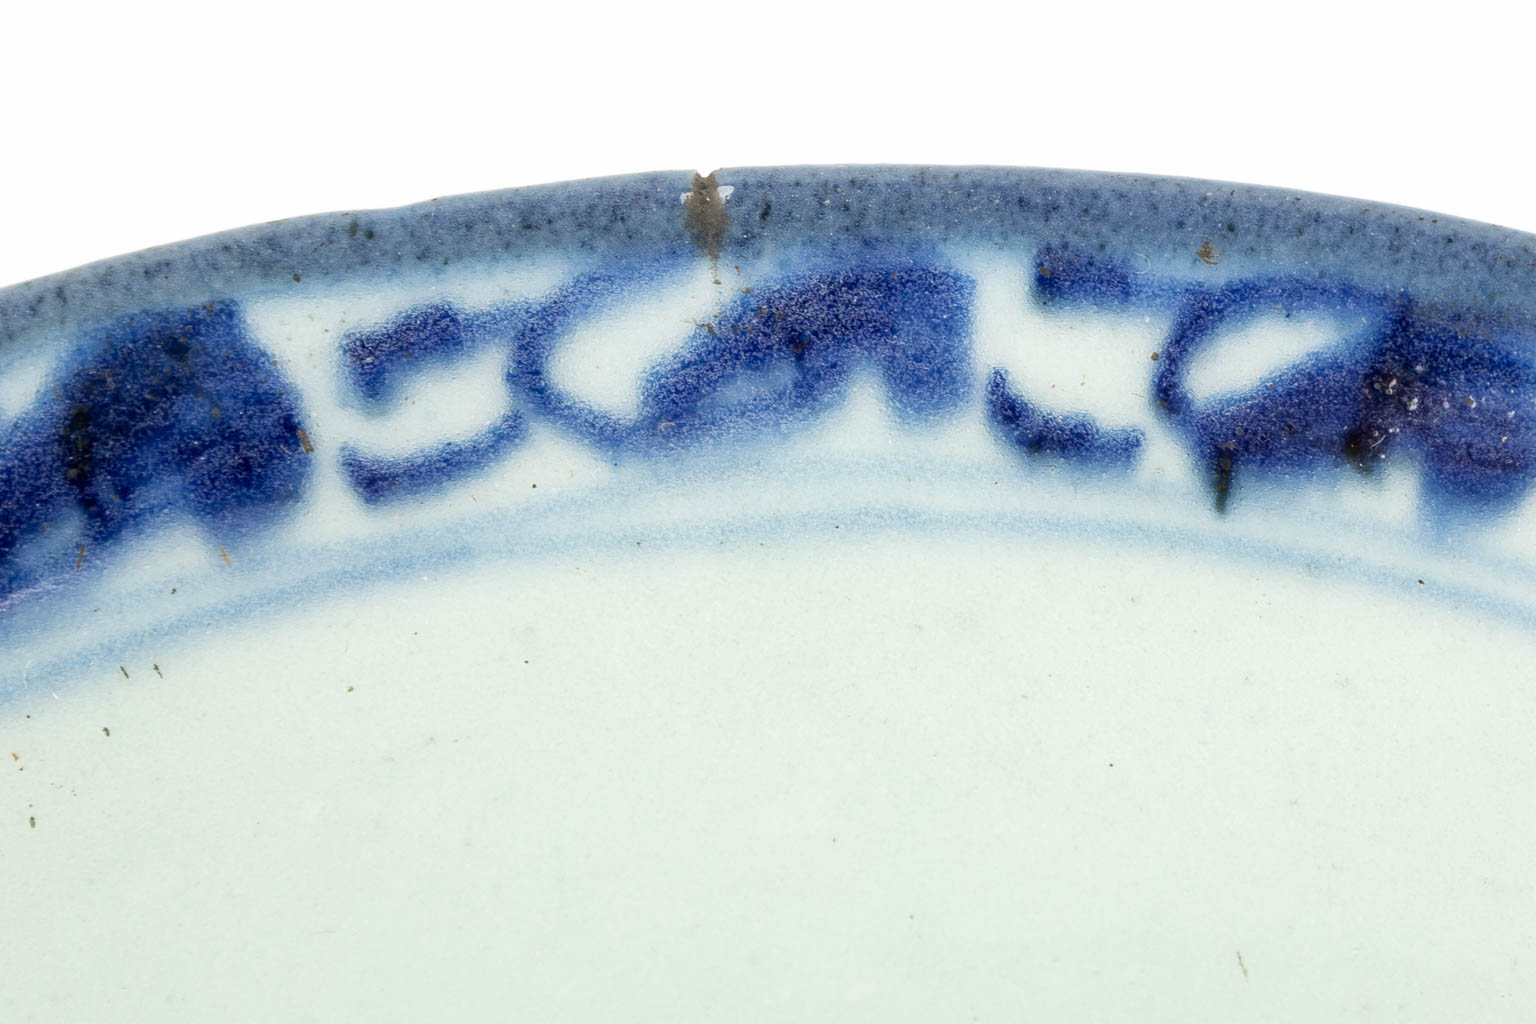 A pair of Chinese bowls made of porcelain with a blue-white decor. (H:7,2cm)